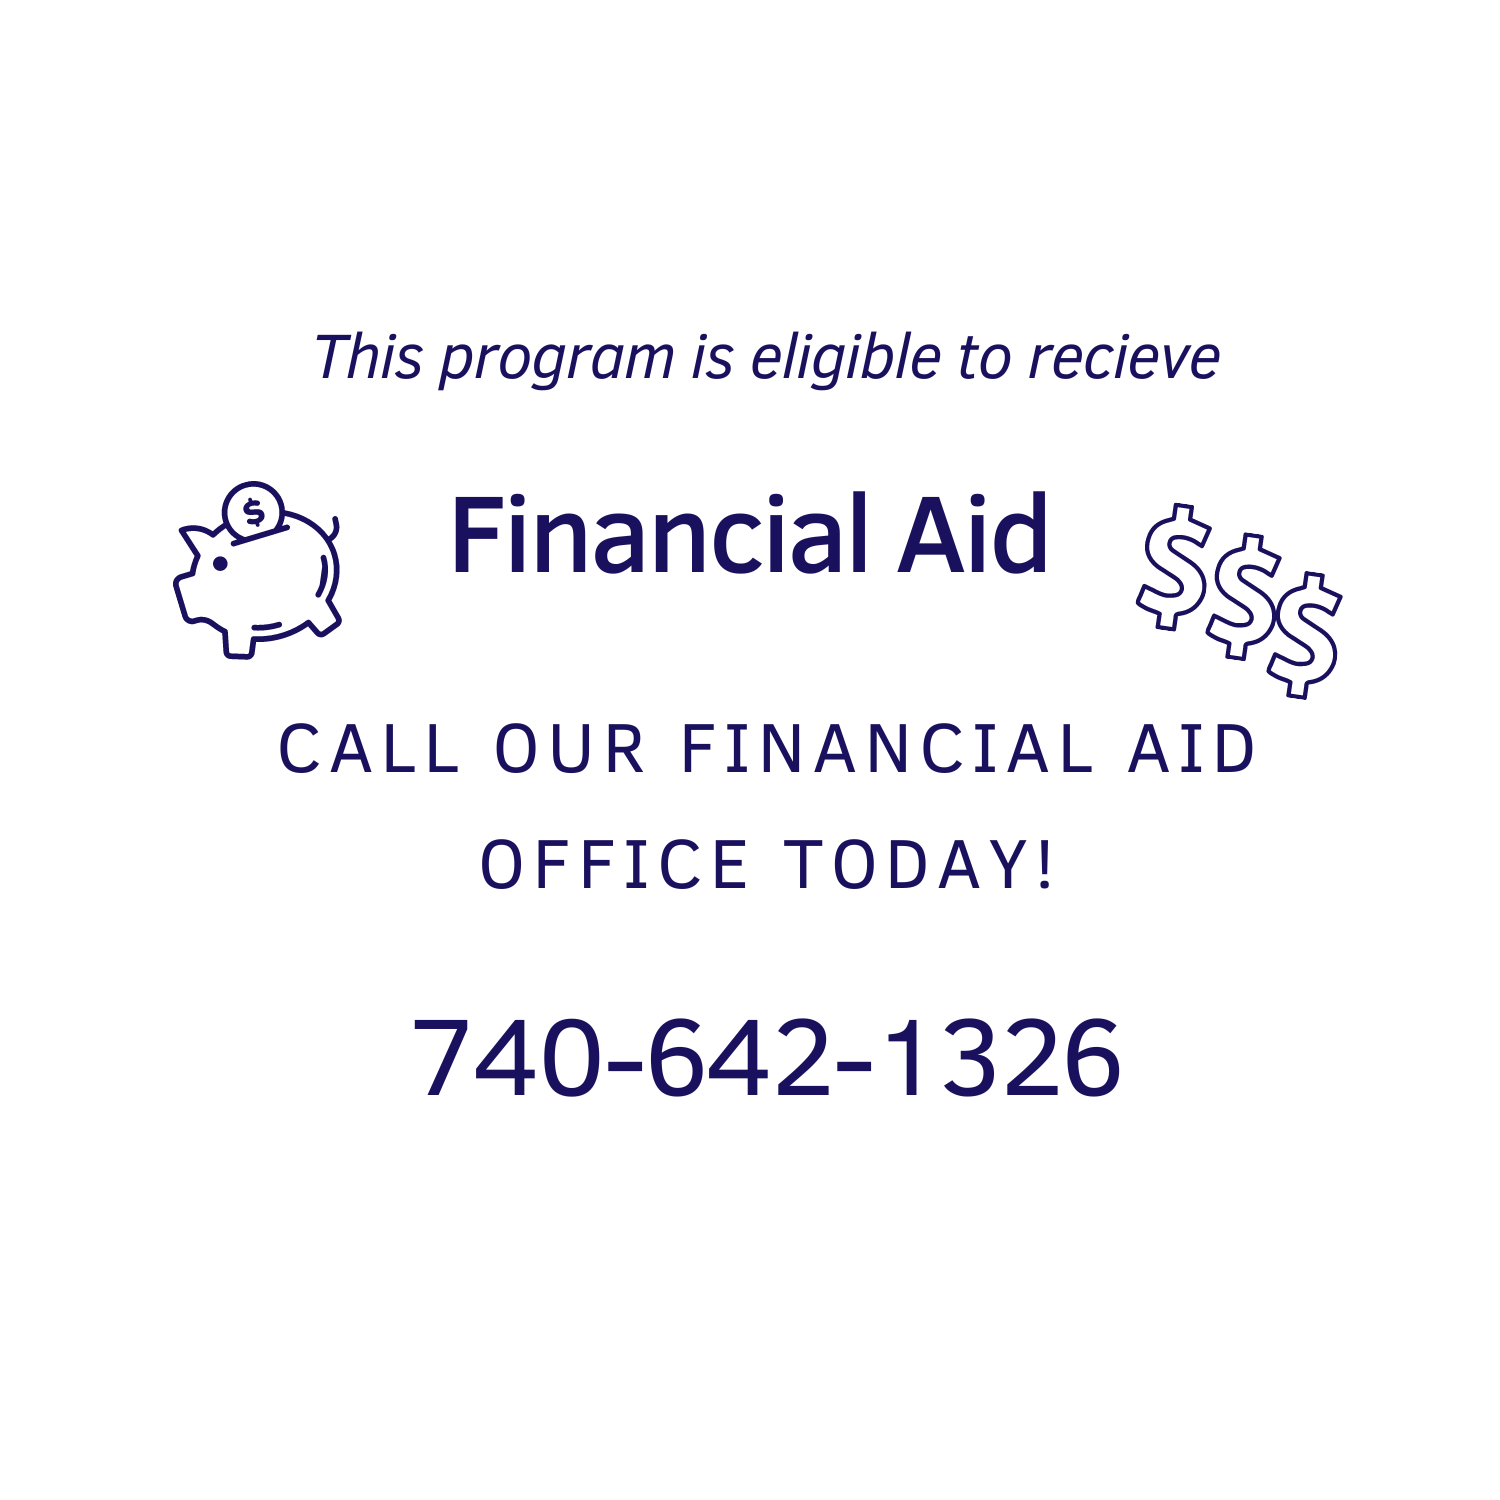 Financial Aid Eligible